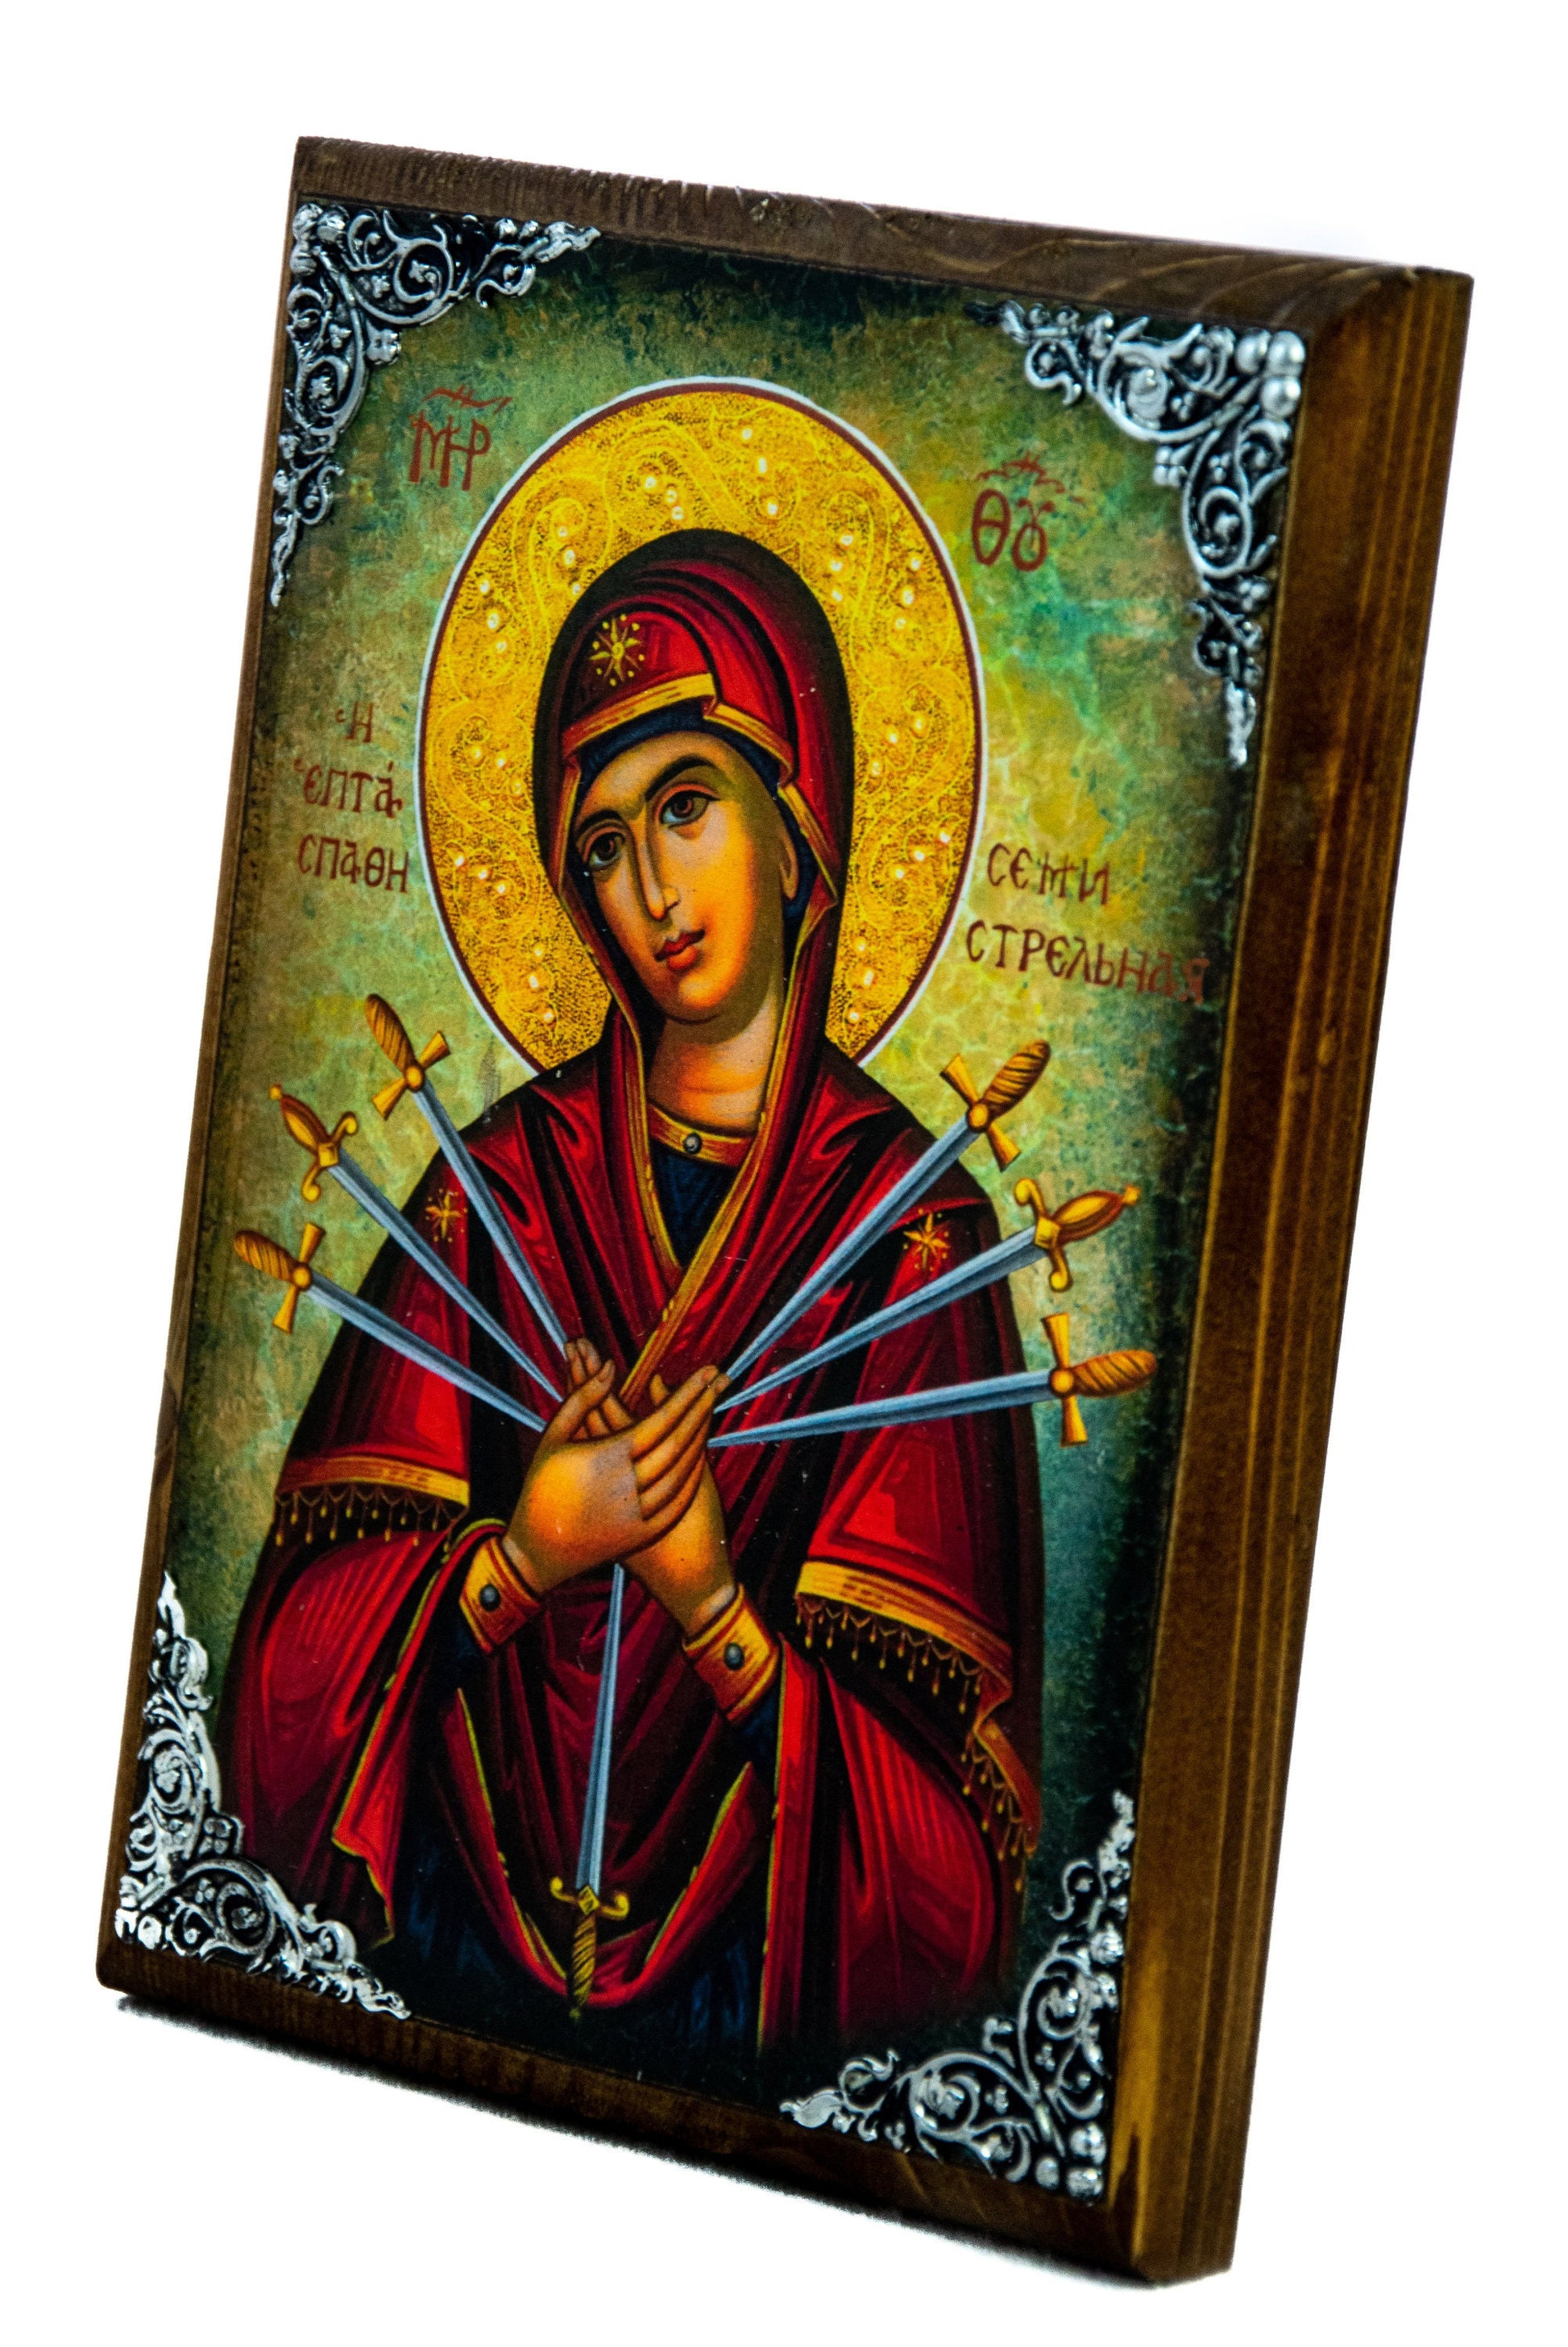 Our Lady of Sorrows icon, Virgin Mary icon Seven 7 swords, Handmade Greek Orthodox Icon, Mother of God Byzantine art wall hanging plaque TheHolyArt